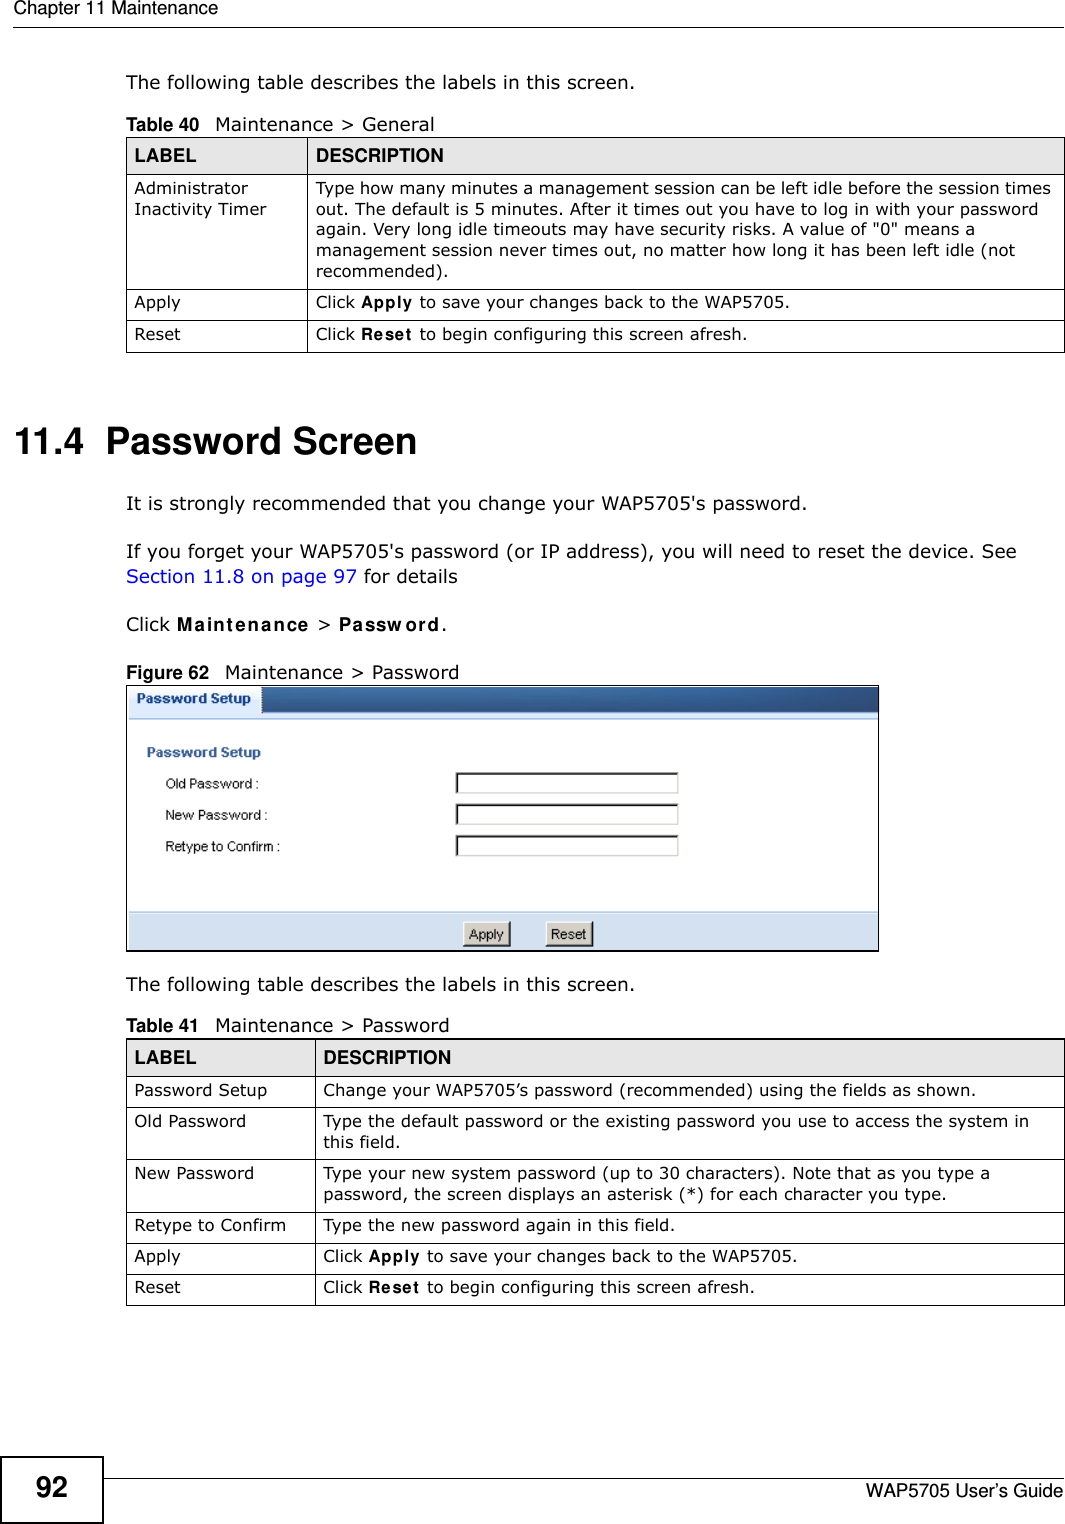 Chapter 11 MaintenanceWAP5705 User’s Guide92The following table describes the labels in this screen.11.4  Password Screen  It is strongly recommended that you change your WAP5705&apos;s password.  If you forget your WAP5705&apos;s password (or IP address), you will need to reset the device. See Section 11.8 on page 97 for detailsClick M a in t e na n ce  &gt; Passw or d.Figure 62   Maintenance &gt; Password The following table describes the labels in this screen.Table 40   Maintenance &gt; GeneralLABEL DESCRIPTIONAdministrator Inactivity TimerType how many minutes a management session can be left idle before the session times out. The default is 5 minutes. After it times out you have to log in with your password again. Very long idle timeouts may have security risks. A value of &quot;0&quot; means a management session never times out, no matter how long it has been left idle (not recommended).Apply Click Apply to save your changes back to the WAP5705.Reset Click Re set  to begin configuring this screen afresh.Table 41   Maintenance &gt; PasswordLABEL DESCRIPTIONPassword Setup Change your WAP5705’s password (recommended) using the fields as shown.Old Password Type the default password or the existing password you use to access the system in this field.New Password Type your new system password (up to 30 characters). Note that as you type a password, the screen displays an asterisk (*) for each character you type.Retype to Confirm Type the new password again in this field.Apply Click Apply to save your changes back to the WAP5705.Reset Click Re set  to begin configuring this screen afresh.